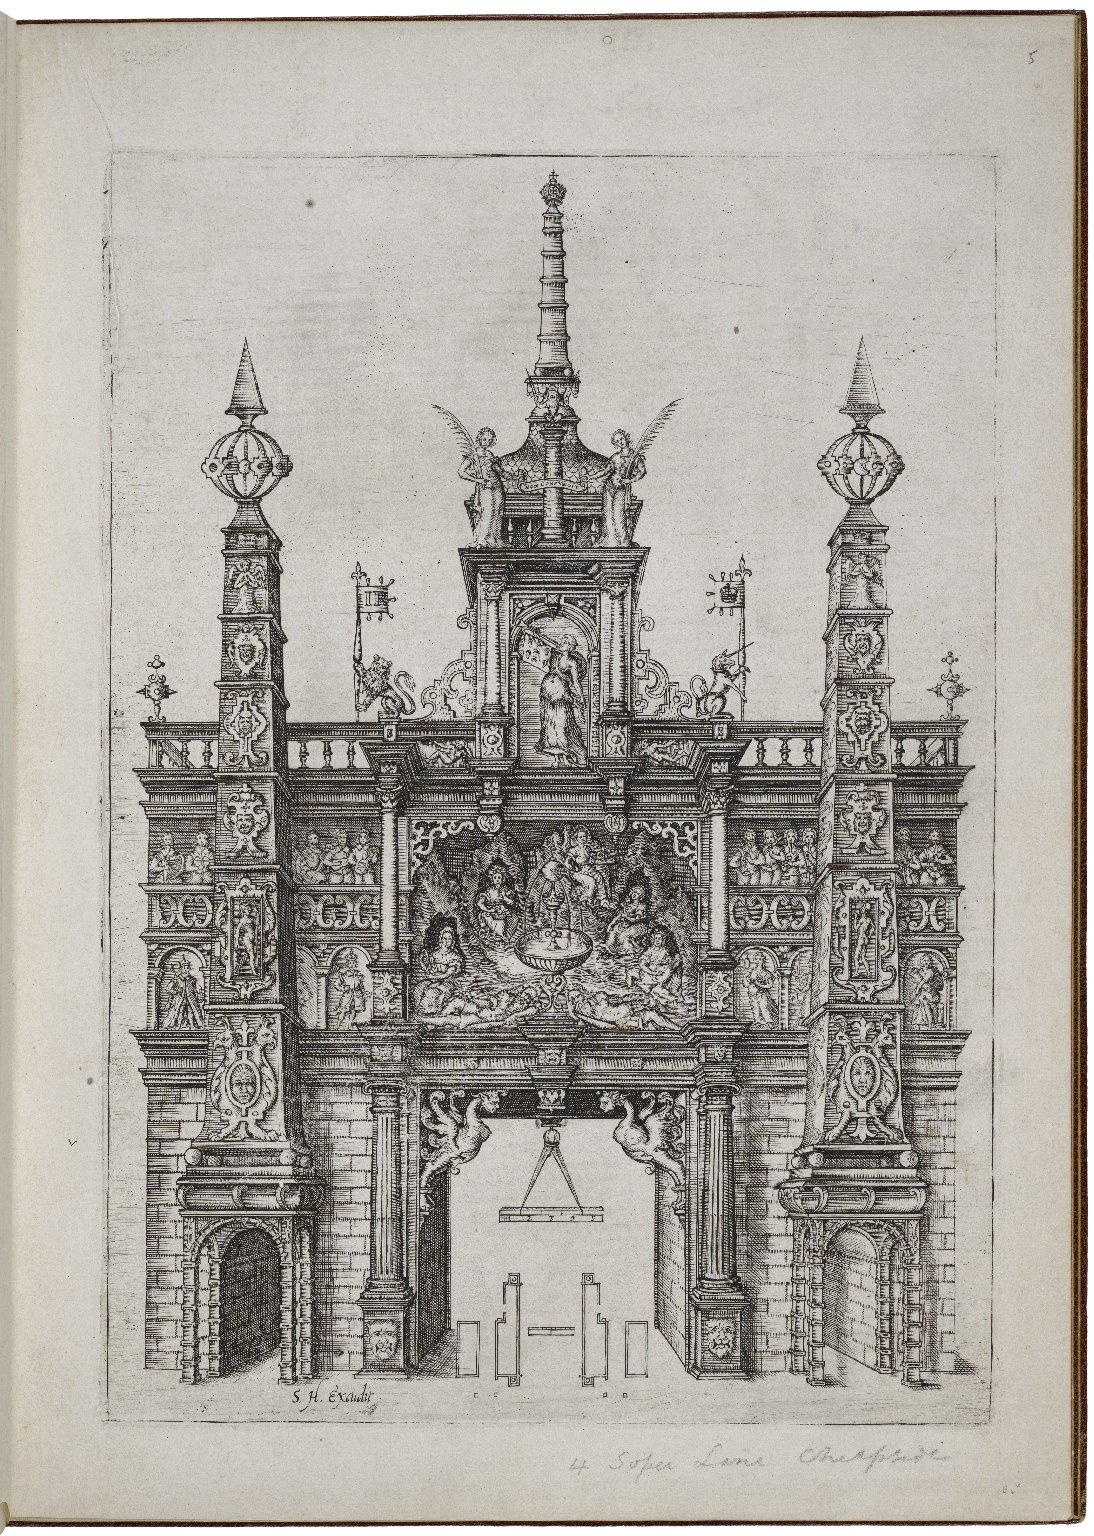 Engraving of the triumphal arch at Fenchurch Street by Stephen Harrison. Image courtesy of the Folger Digital Image Collection.